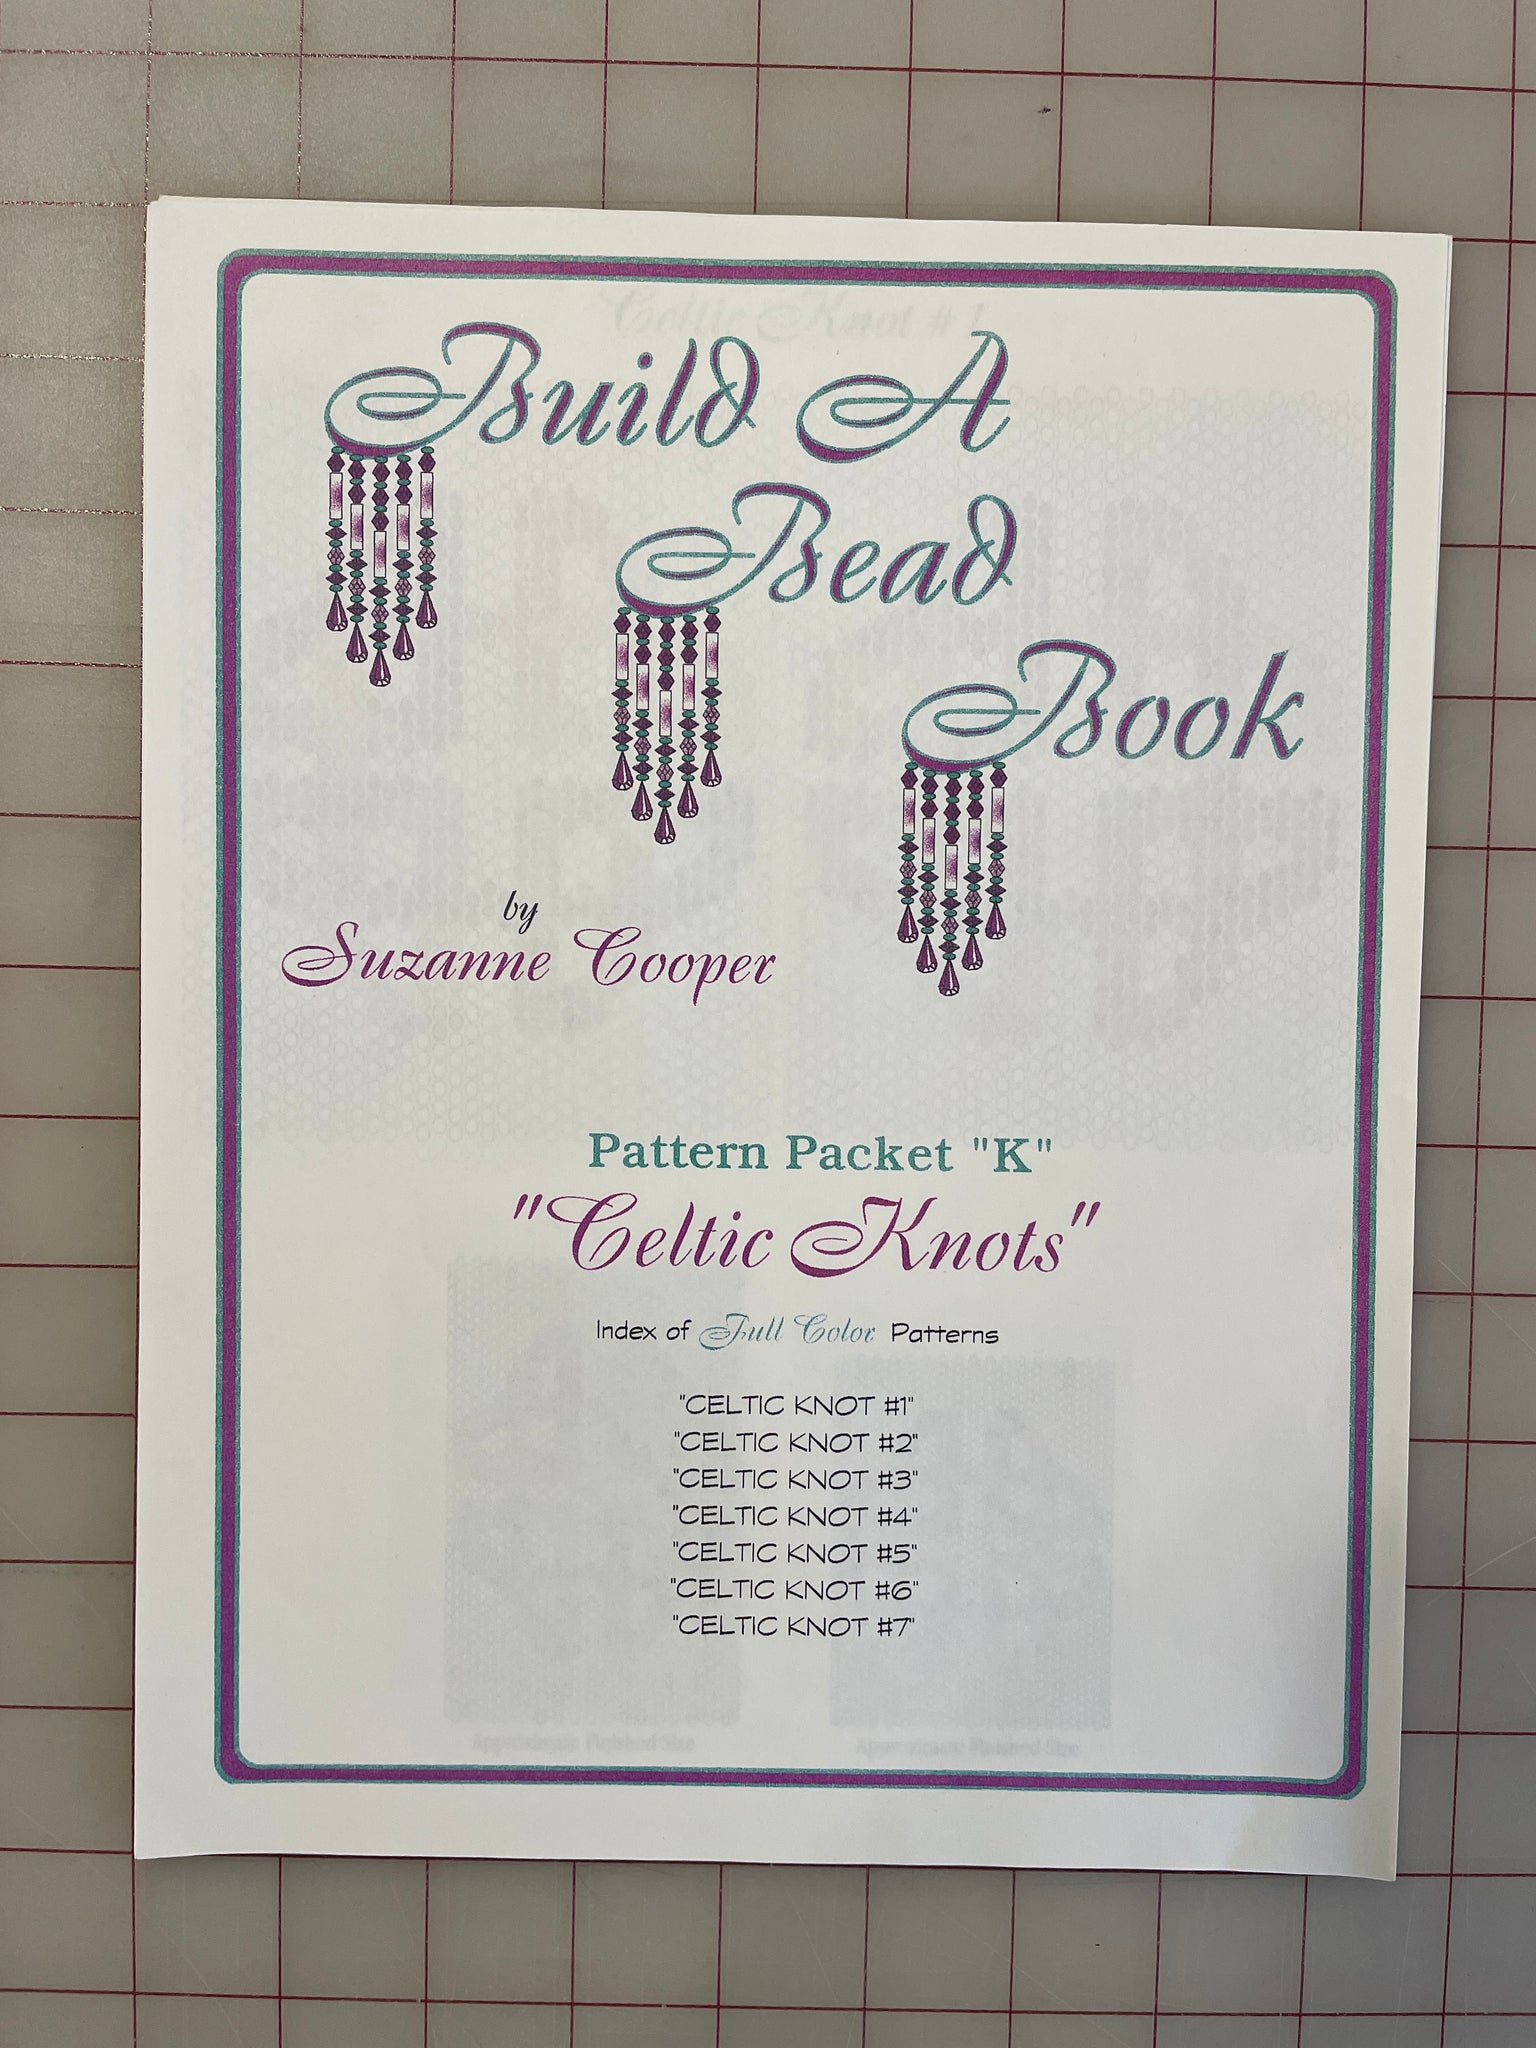 Beading Pattern Book - "Build A Bead Book" Packet "K"